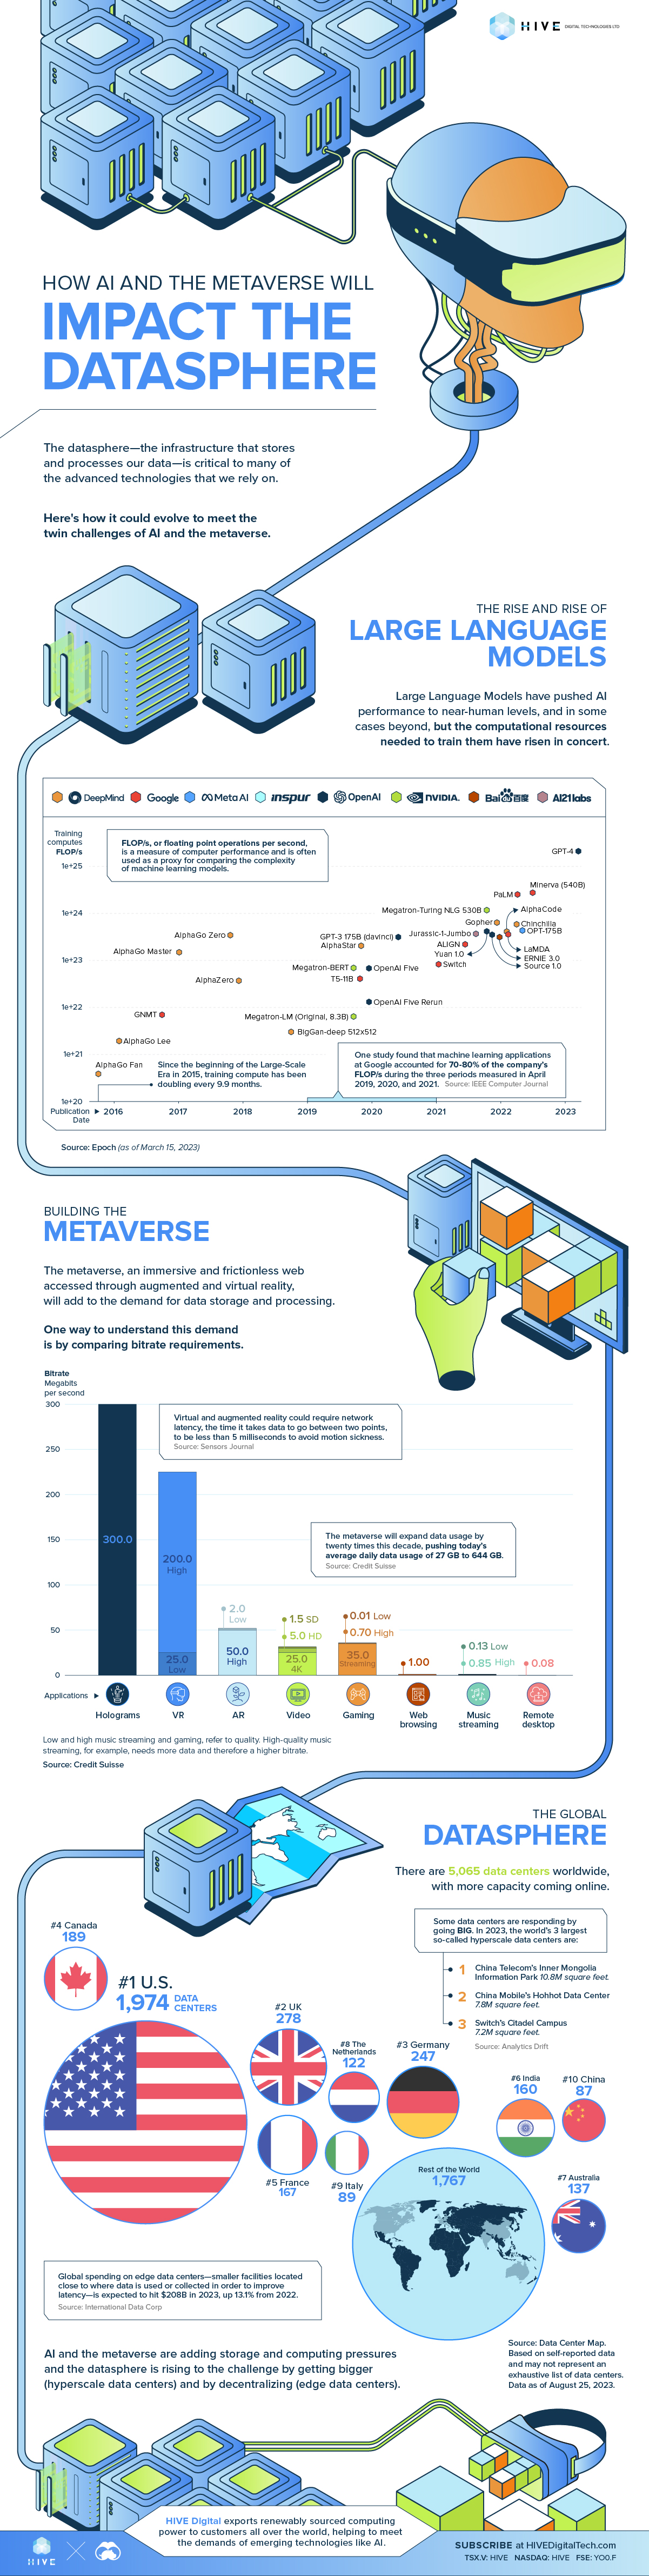 Infographic showing how AI, because of the ever-increasing demands of training compute, and the metaverse, with the large amount of data it will produce, will impact data centers, which are either getting ever larger, or decentralizing along the lines of Edge Computing.